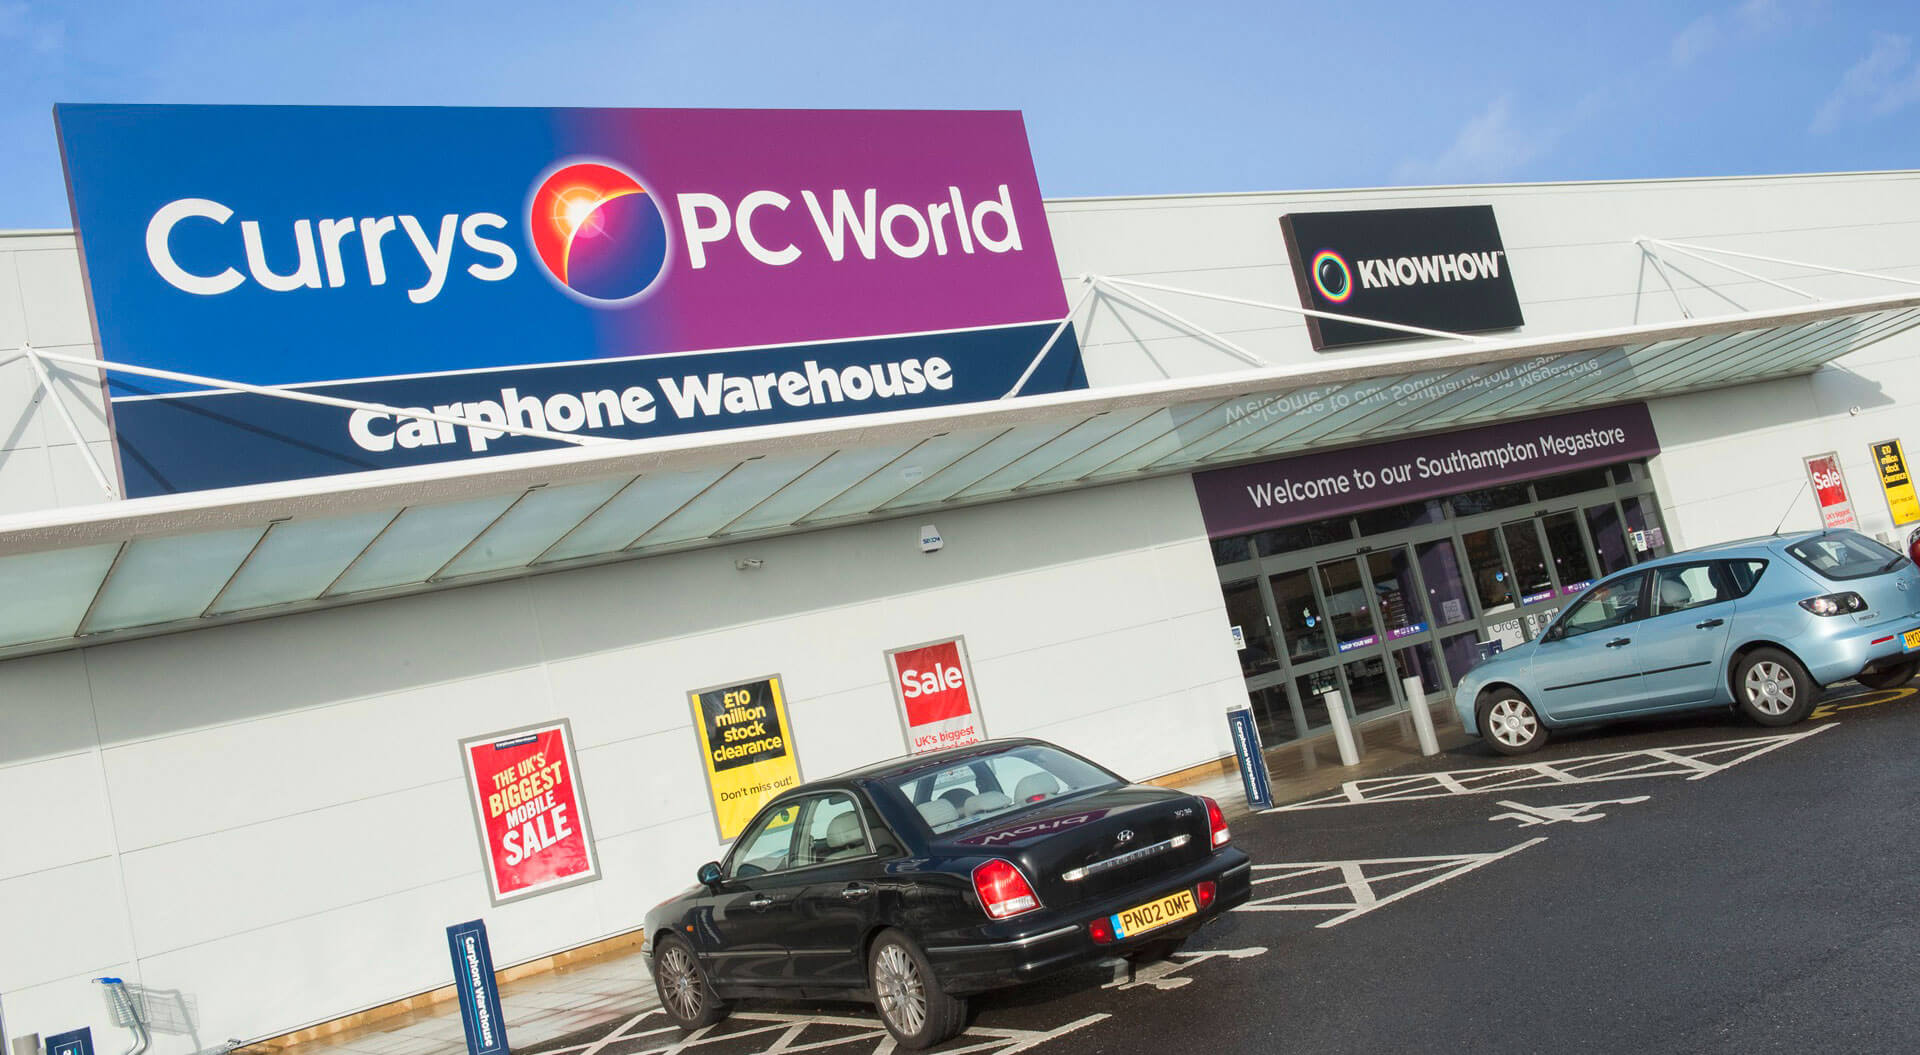 Currys PC World electronics technology retail branding applied to store exteriors